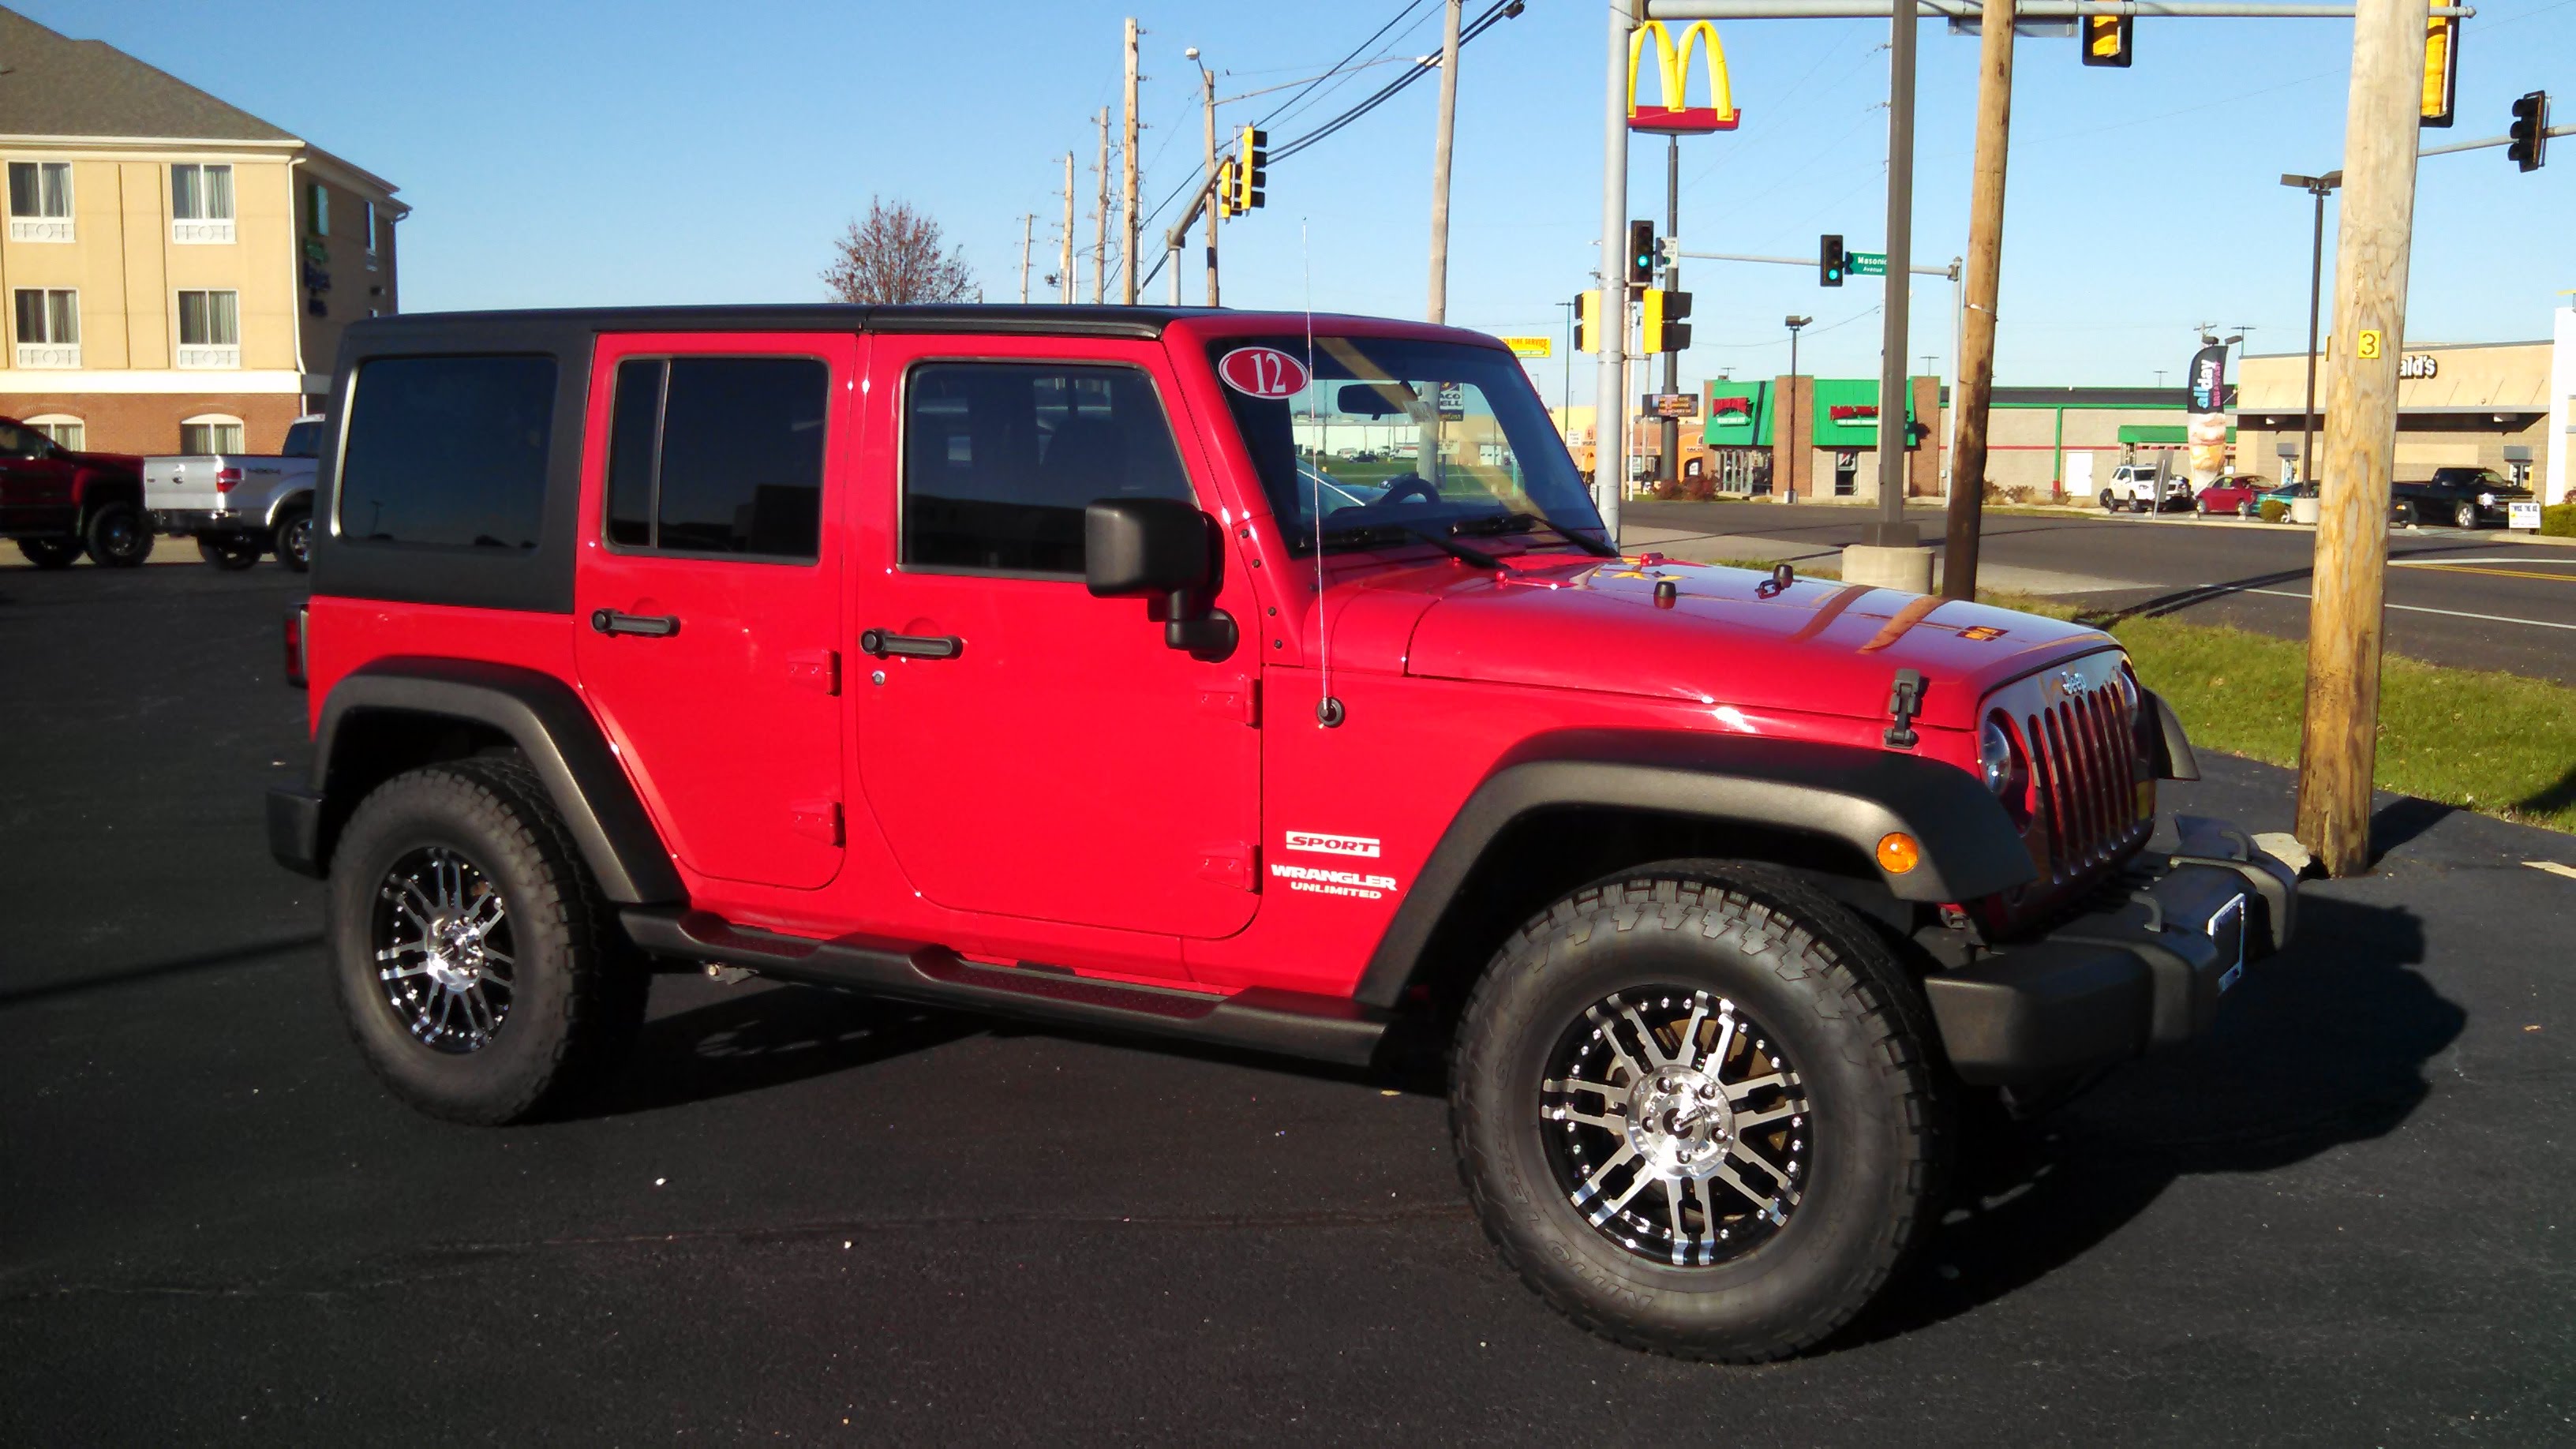 2012 Red Jeep Wrangler Unlimited for sale - YouTube